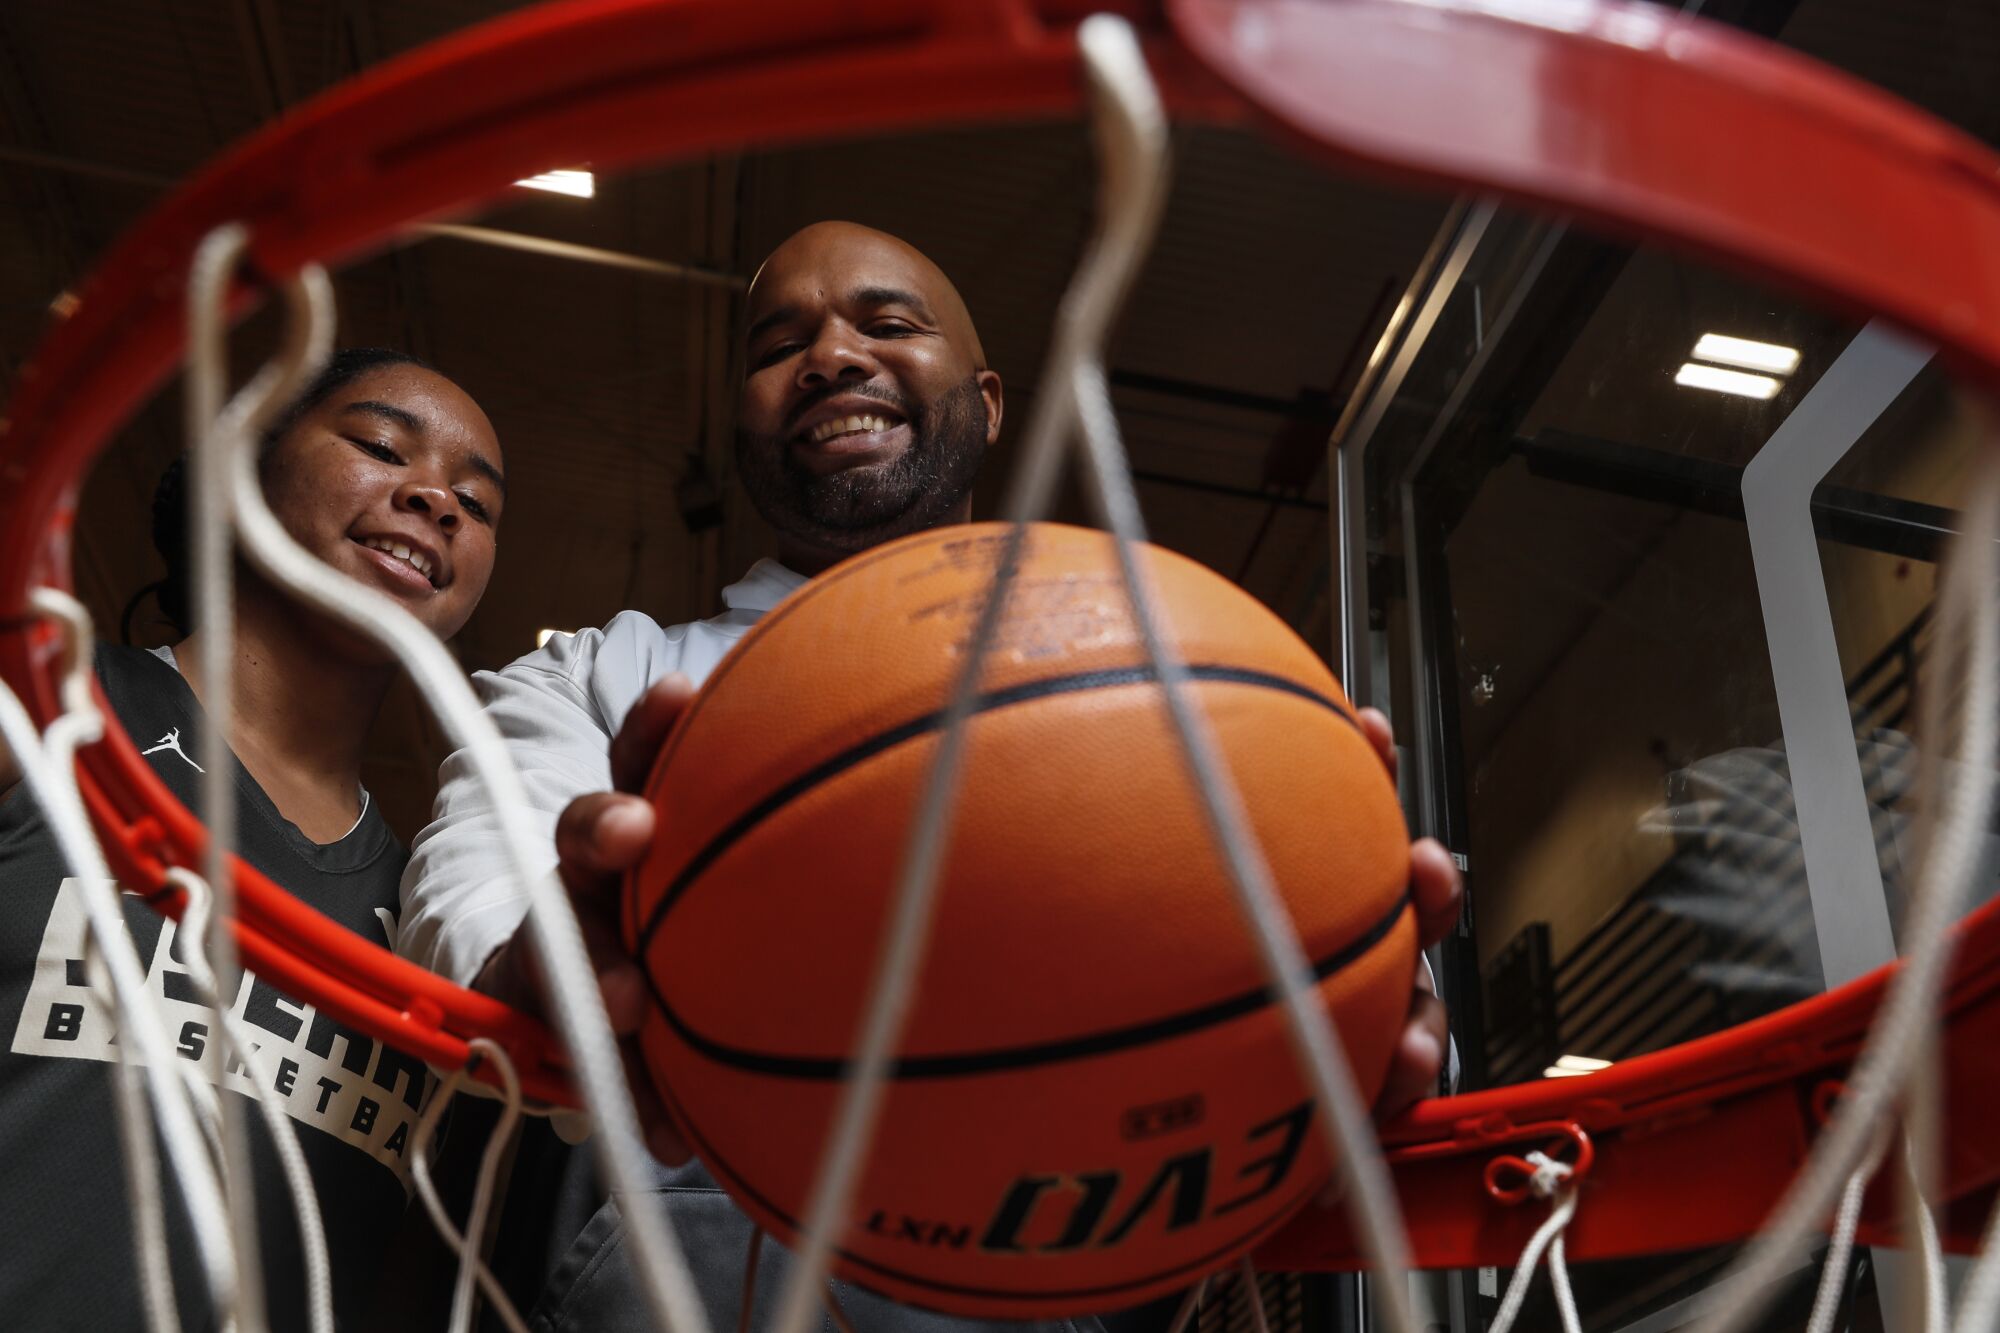 A man and daughter pose near basketball hoop.